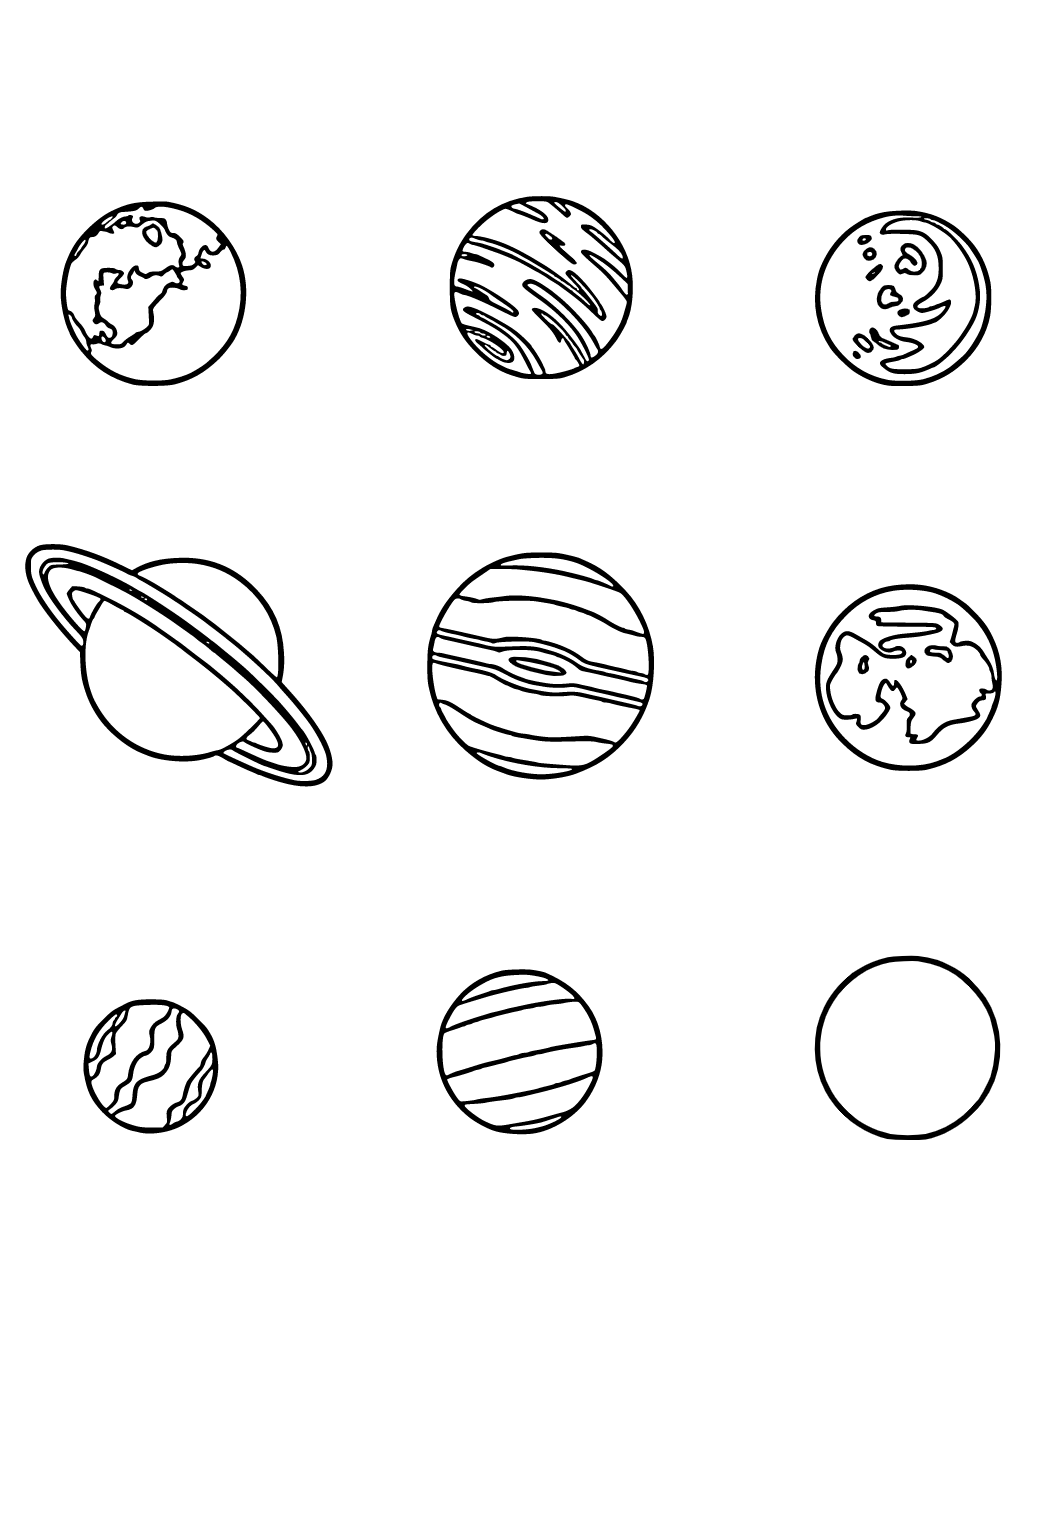 free printable picture solar system